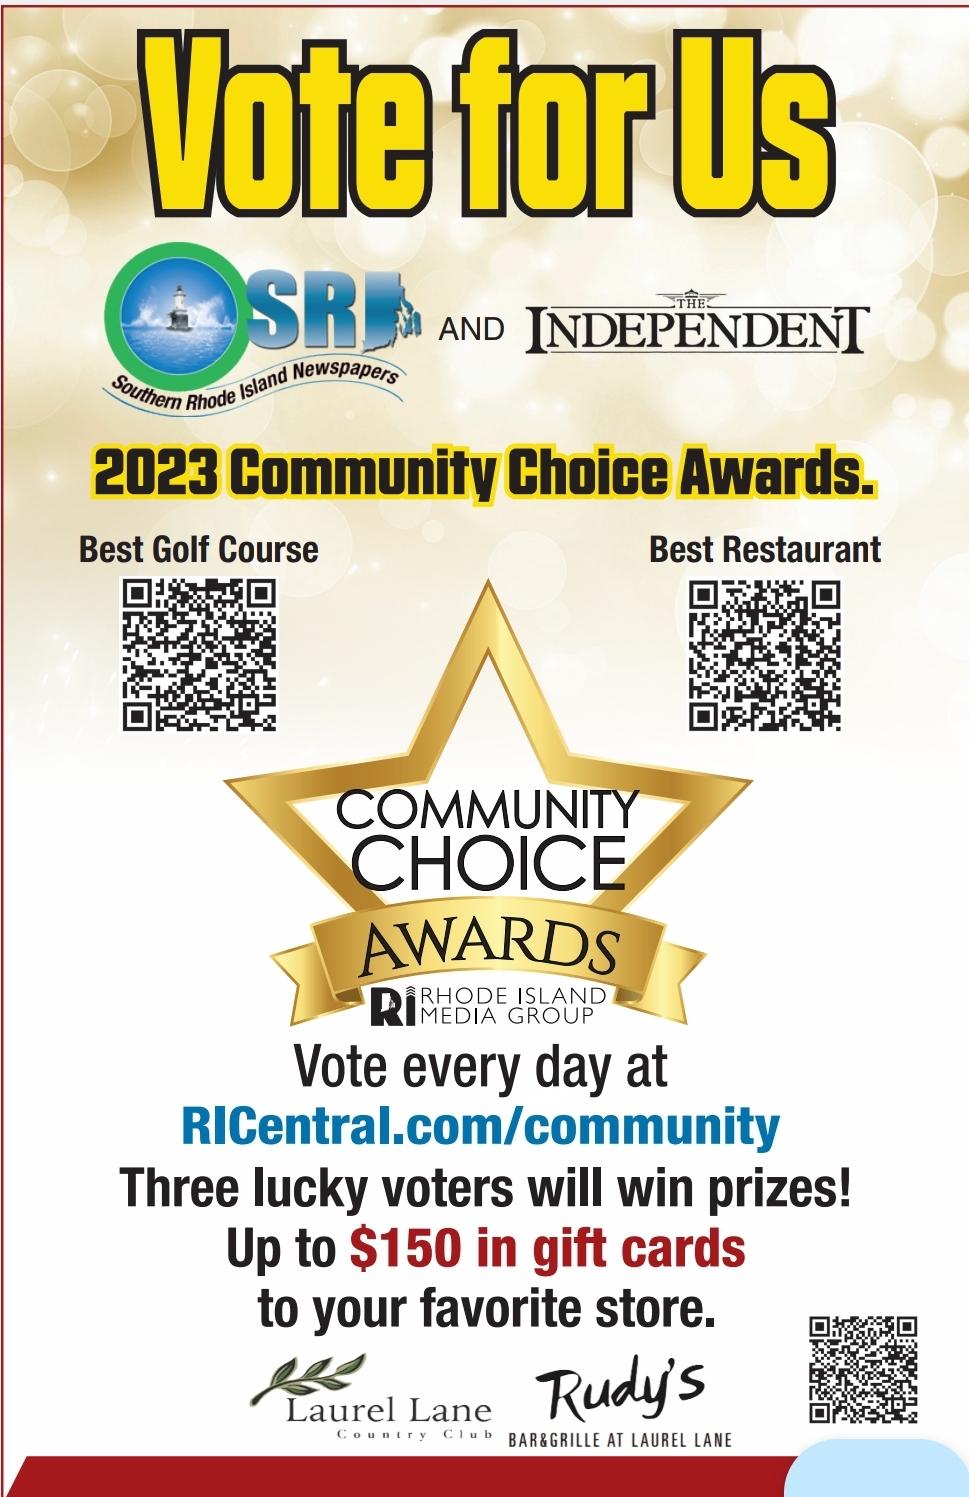 2023 Community Choice Awards - Please VOTE for Laurel Lane and Rudy's Bar&Grille